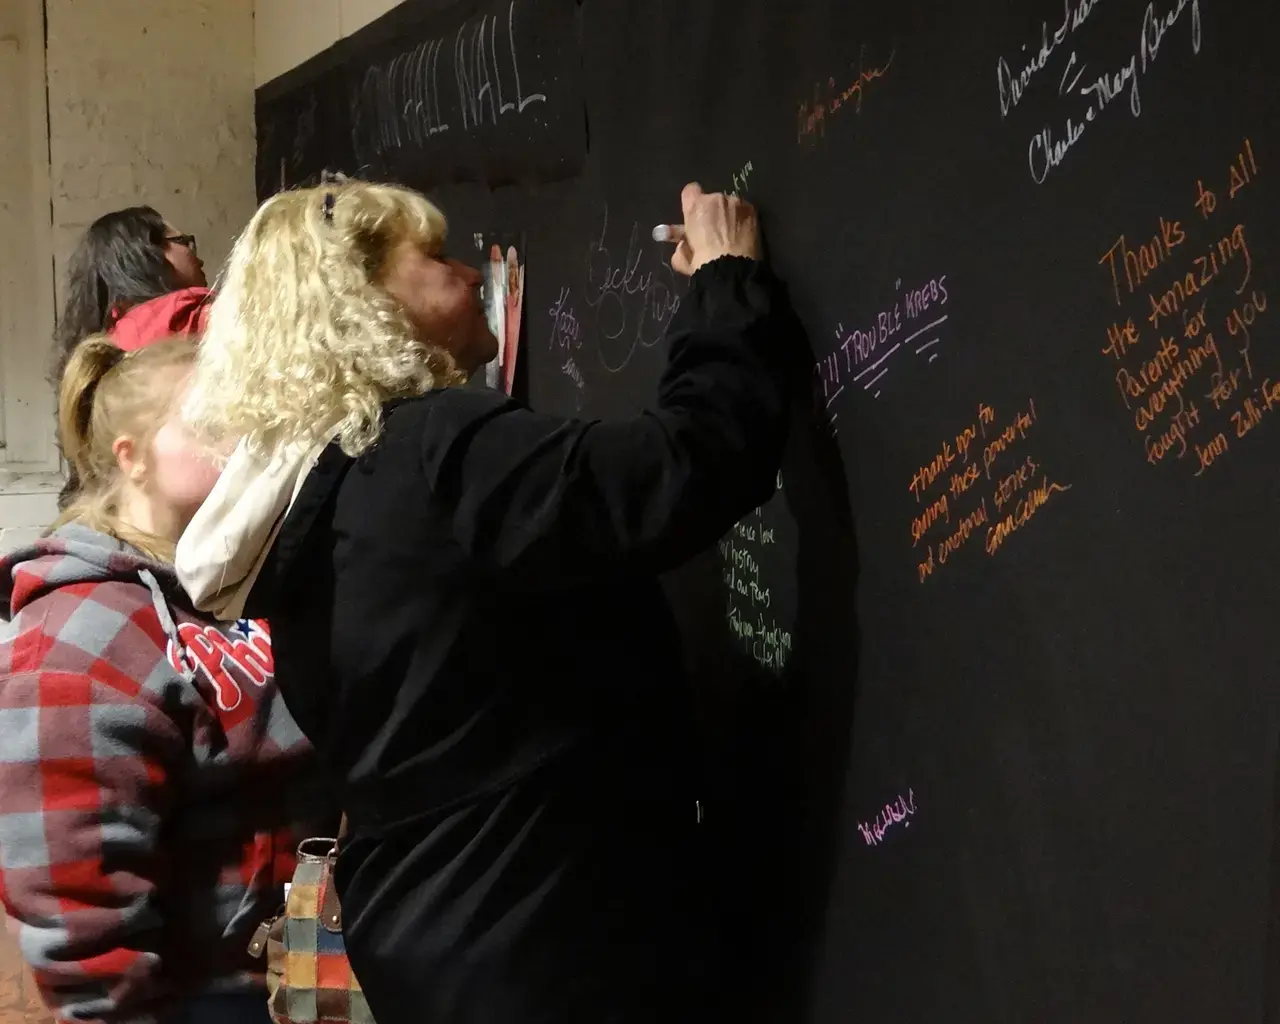 Carol Csaniz signs A Fierce Kind of Love Town Hall Wall. Photo by Christy Beck.